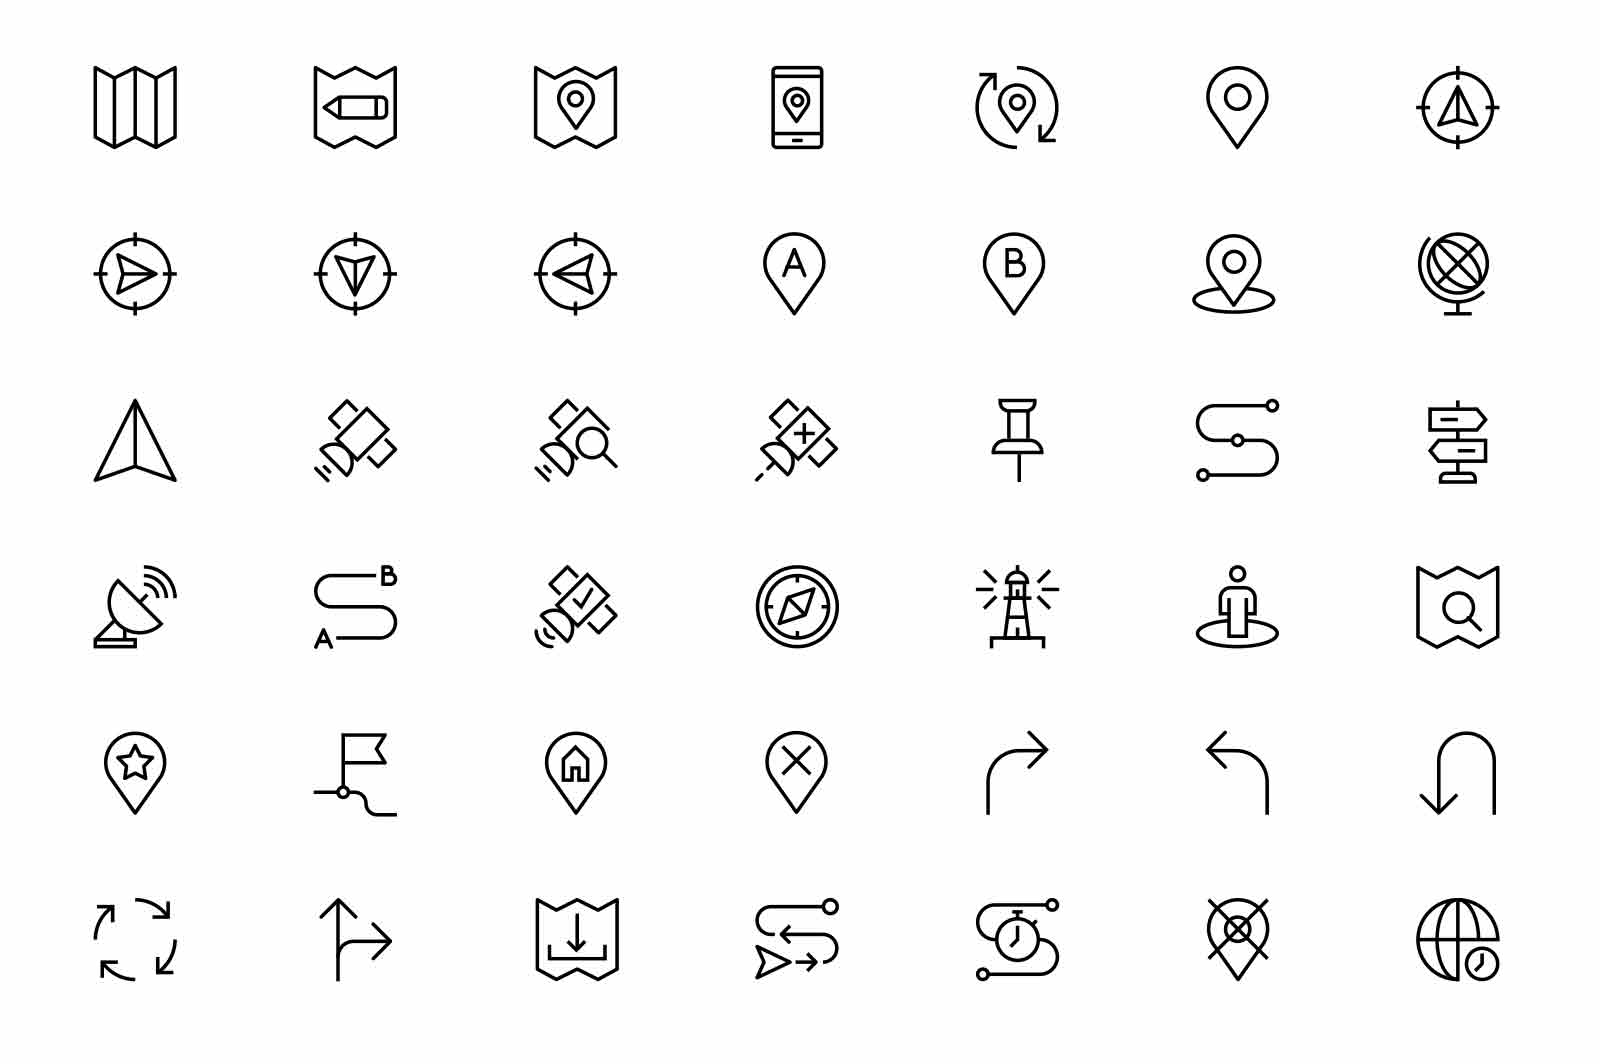 Follow map and find way icons set vector illustration. Methods to get to specific place line icon. Navigation, gps, map and guidance concept